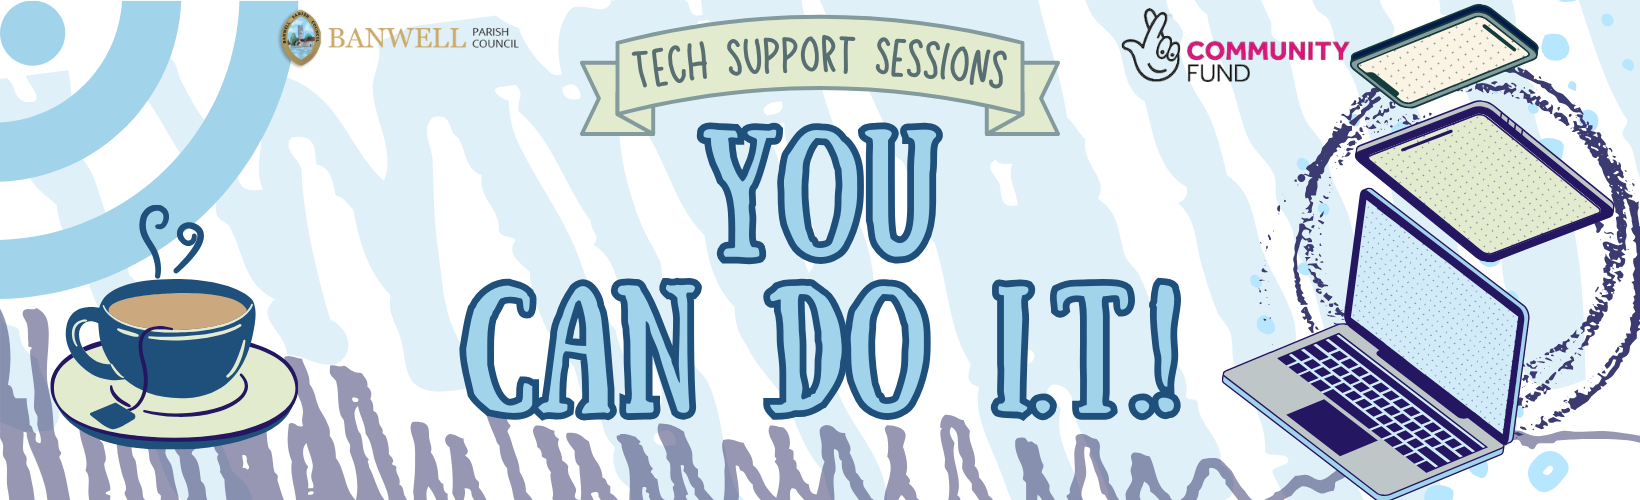 Tech Support Sessions: You Can Do I.T! Banwell Parish Council Logo. National Lottery Community Fund logo.